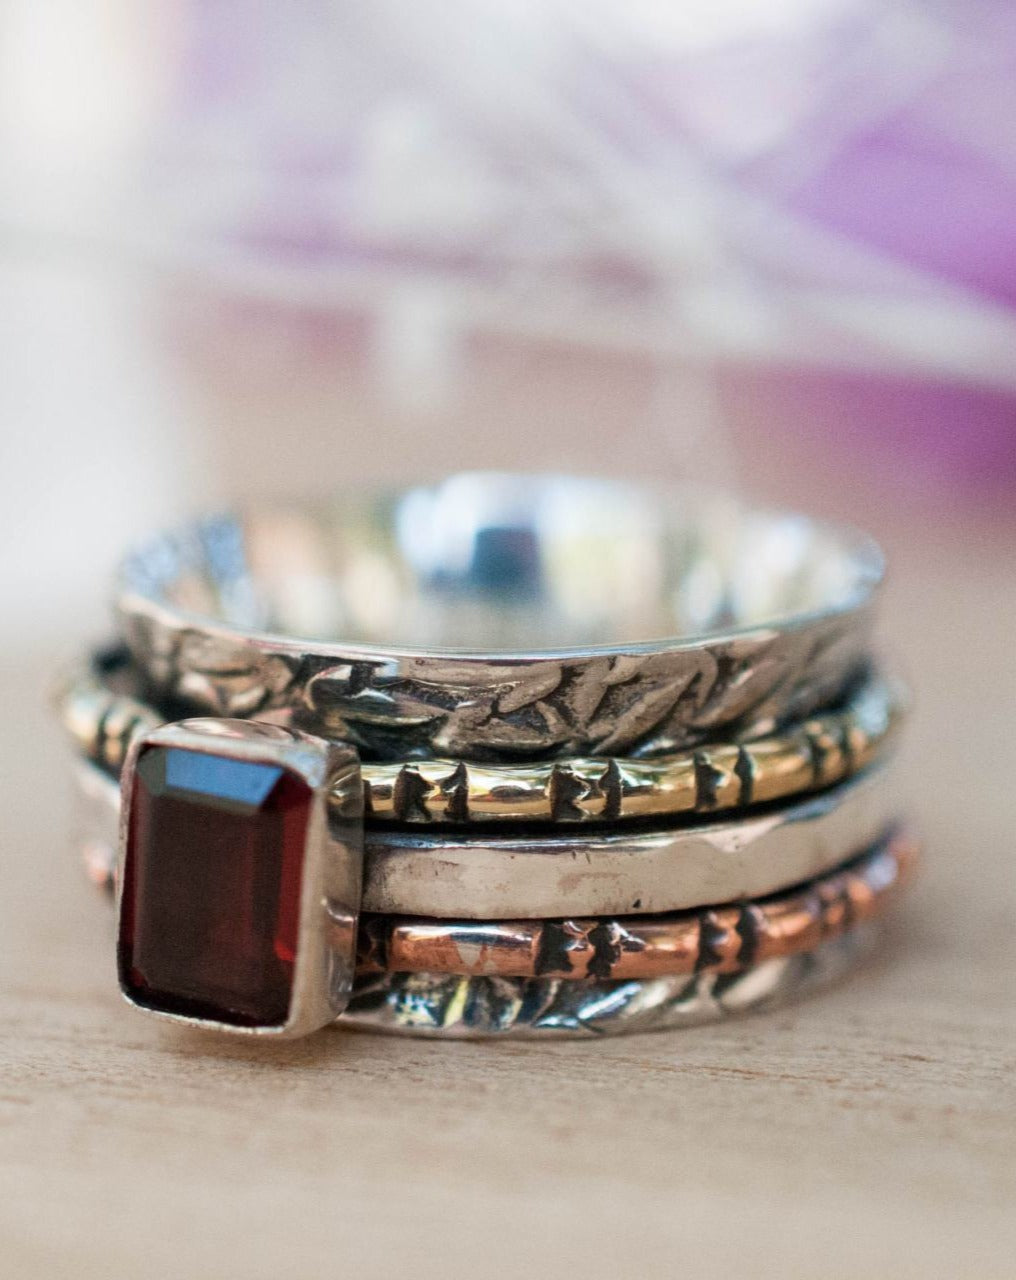 Garnet Ring * Meditation * Spinner * Spinning * Anxiety * Hammered * Worry * Boho * Spin * Thin Band *Sterling Silver *Copper *Bronze BJS020